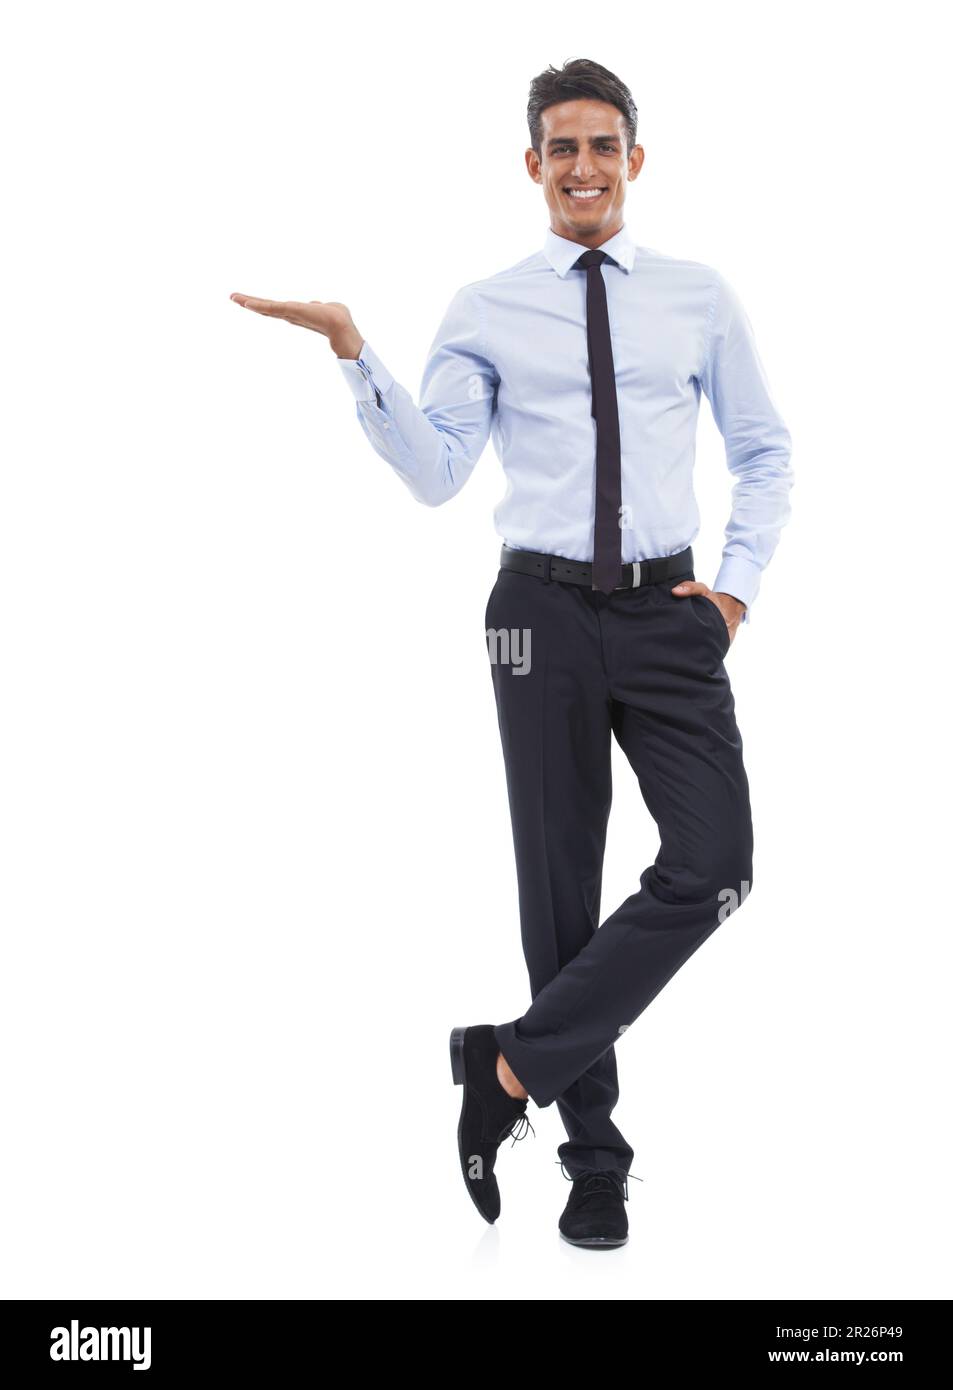 The secret to his success. Portrait of a handsome young businessman standing with one hand outstretched against a white background. Stock Photo